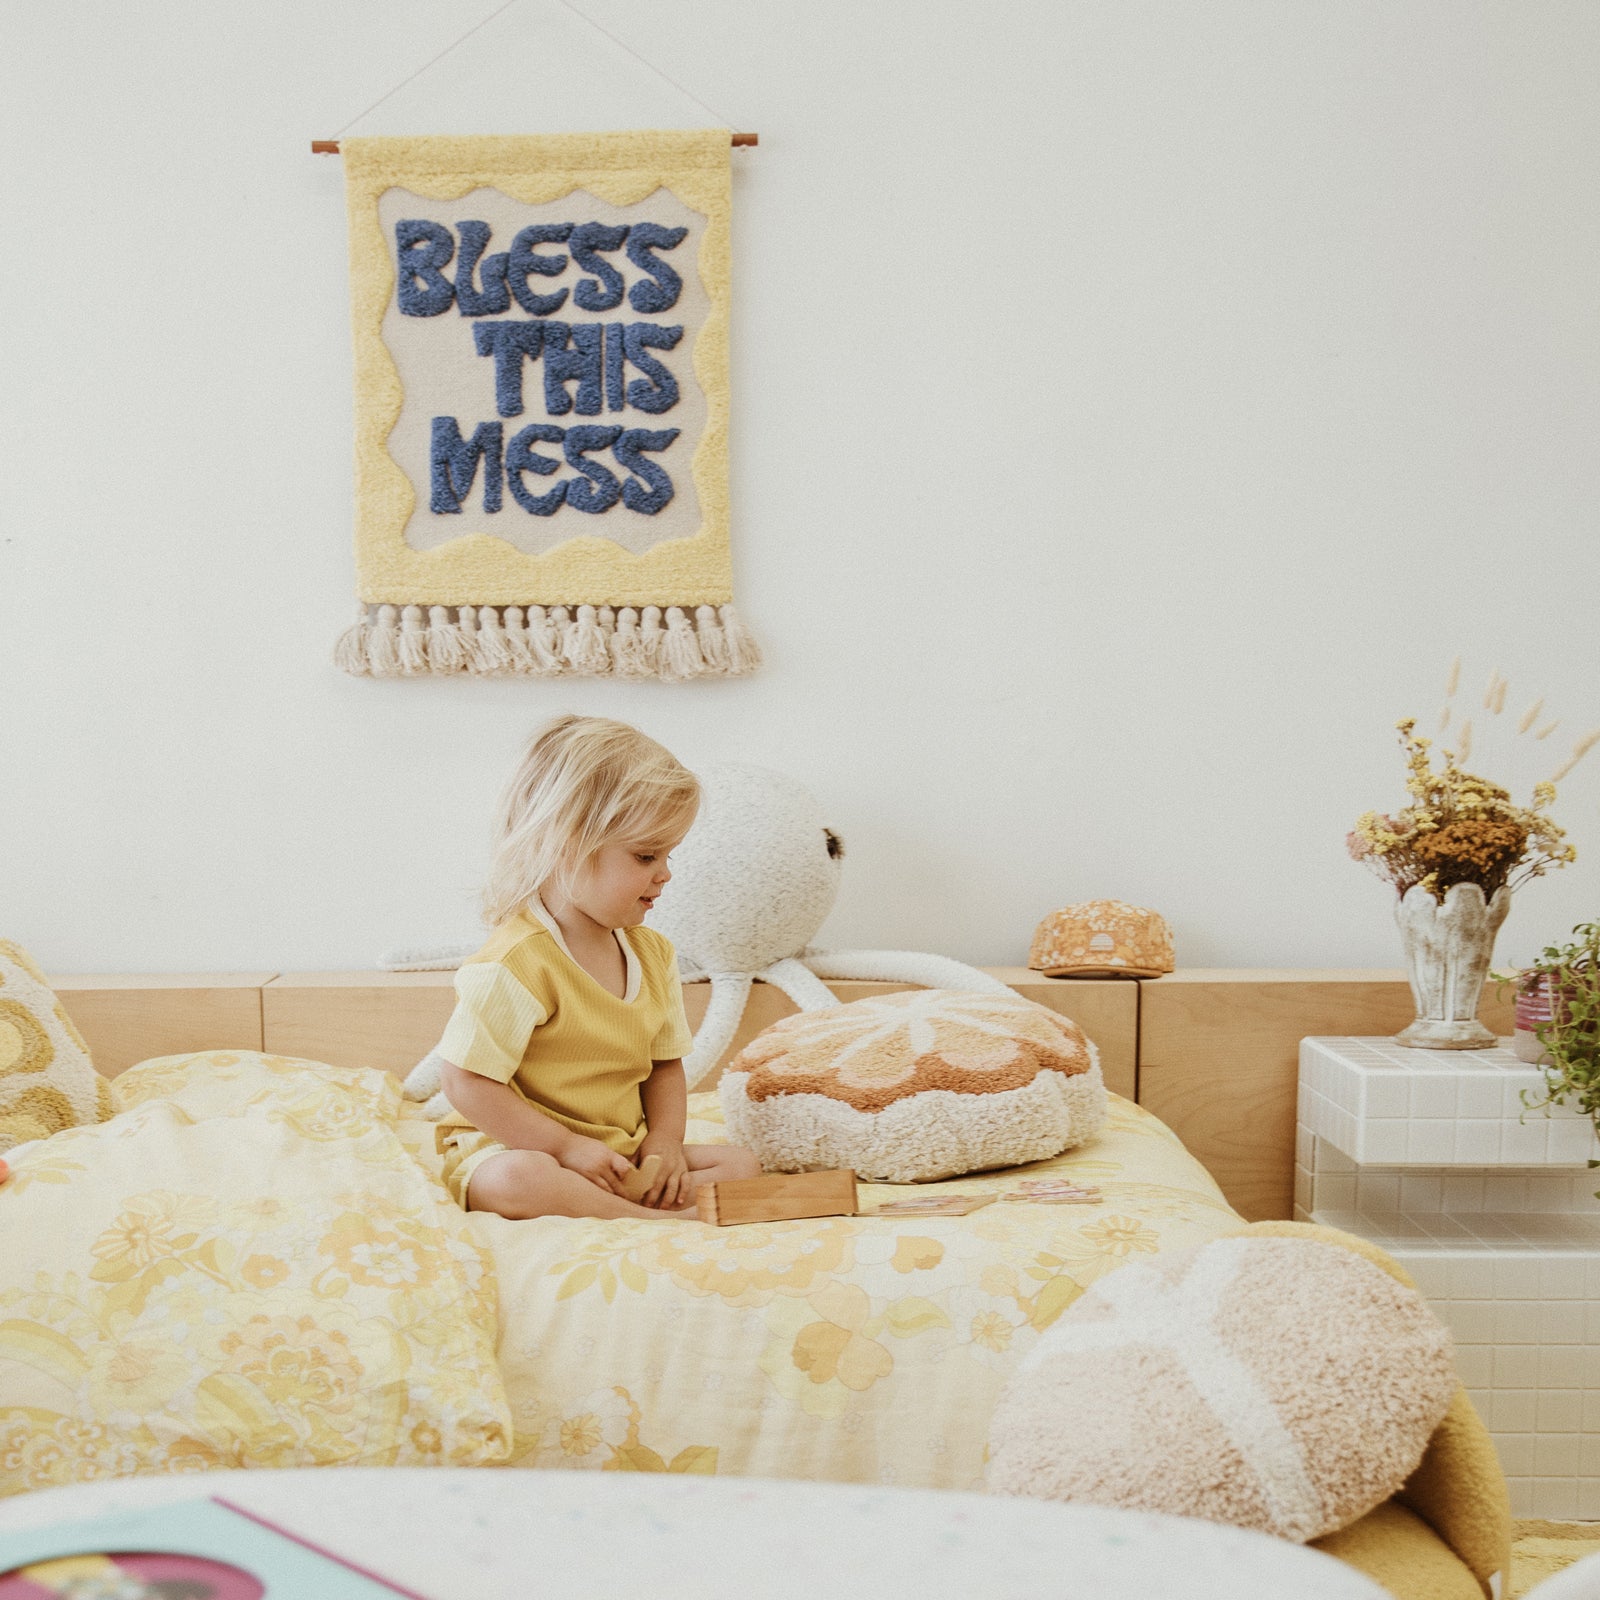 Bless This Mess Tufted Wall Hanging